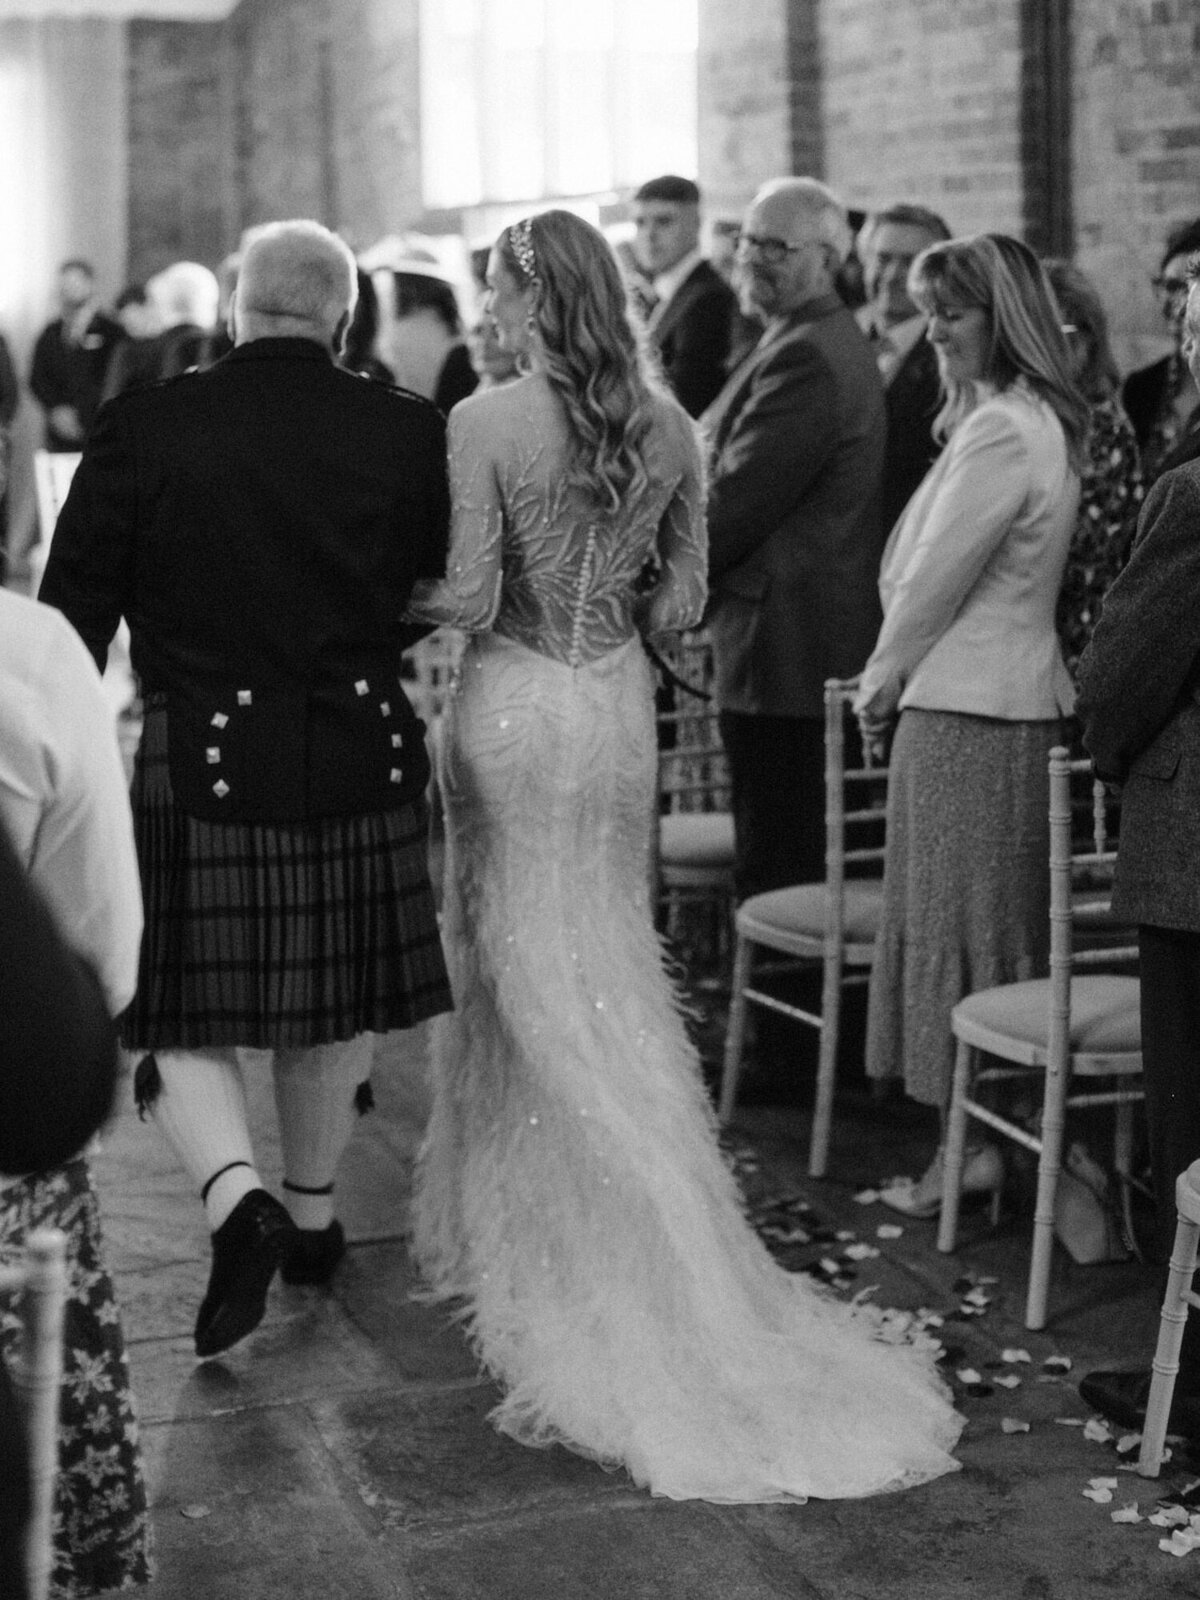 father and daughter walking down the aisle captured from behind